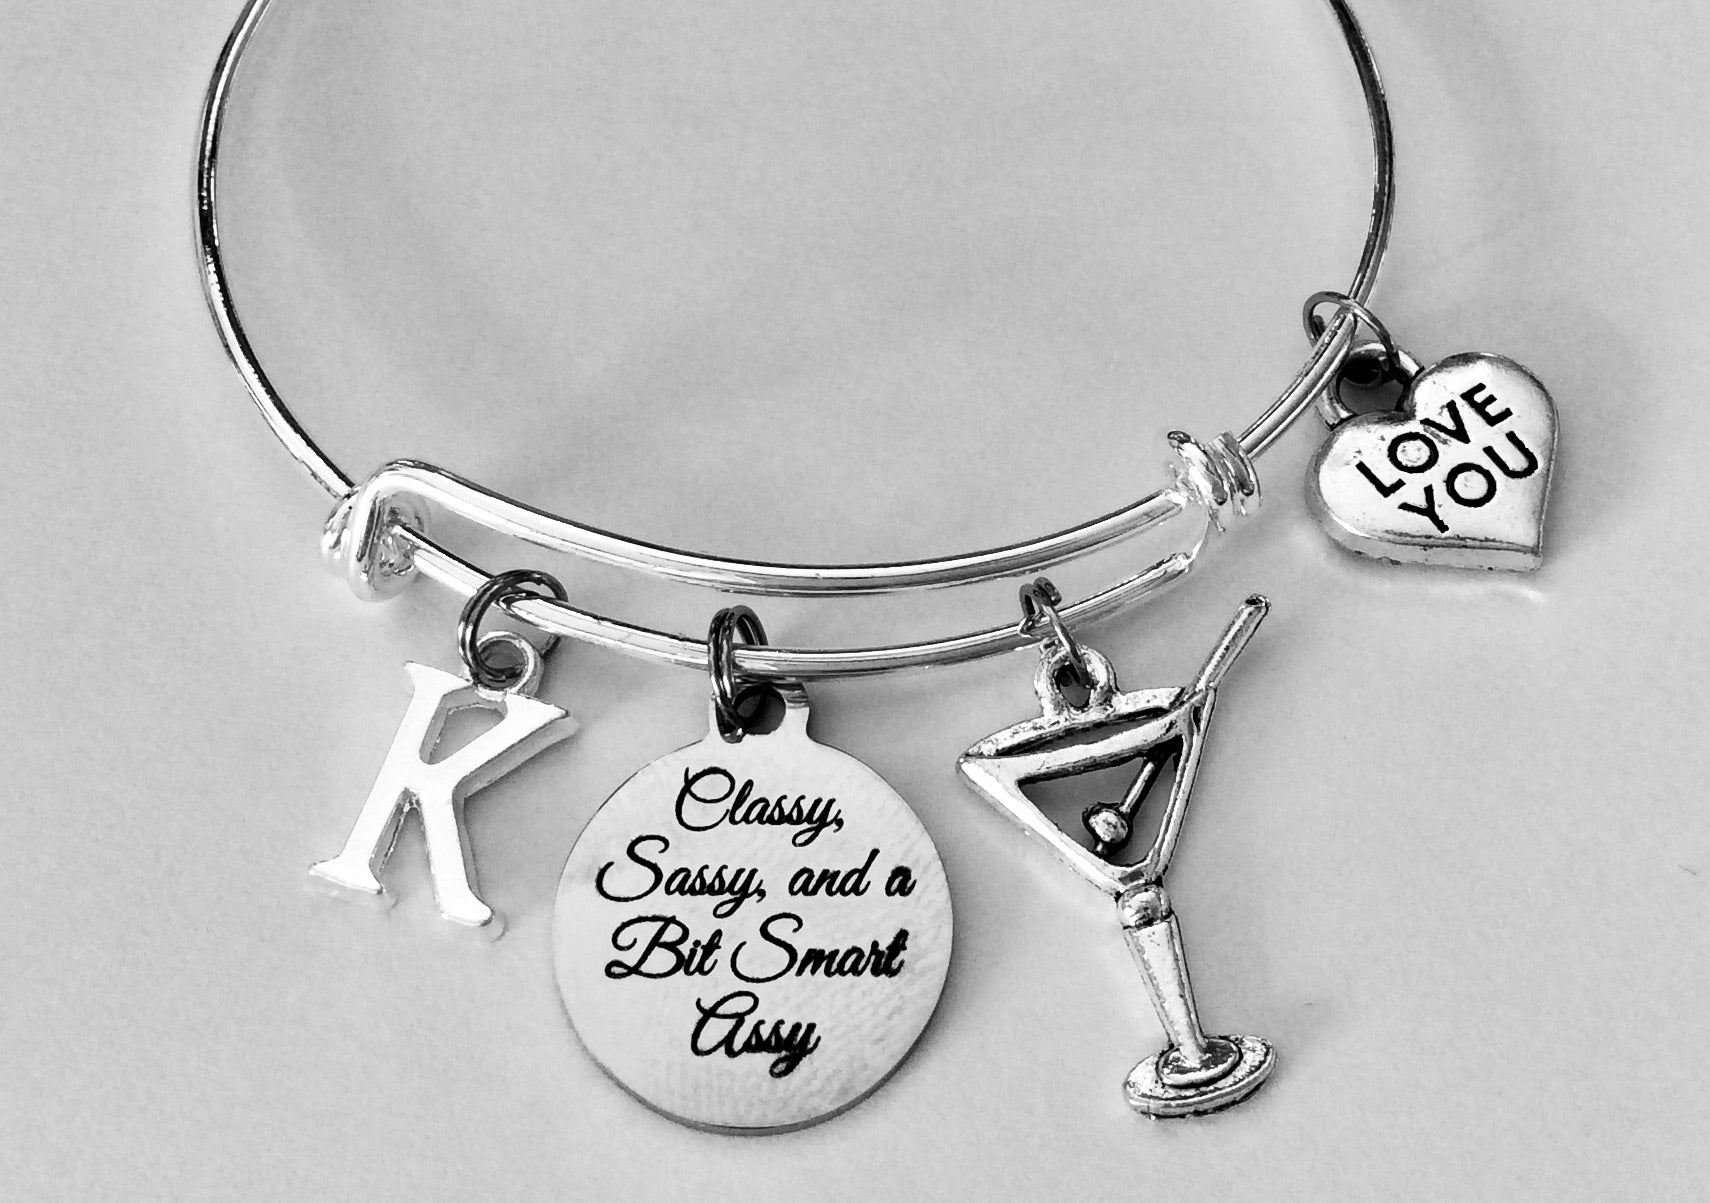 Classy, Sassy, and a Bit Smart Assy Expandable Charm Bracelet Martini Initial Adjustable Bangle Gift